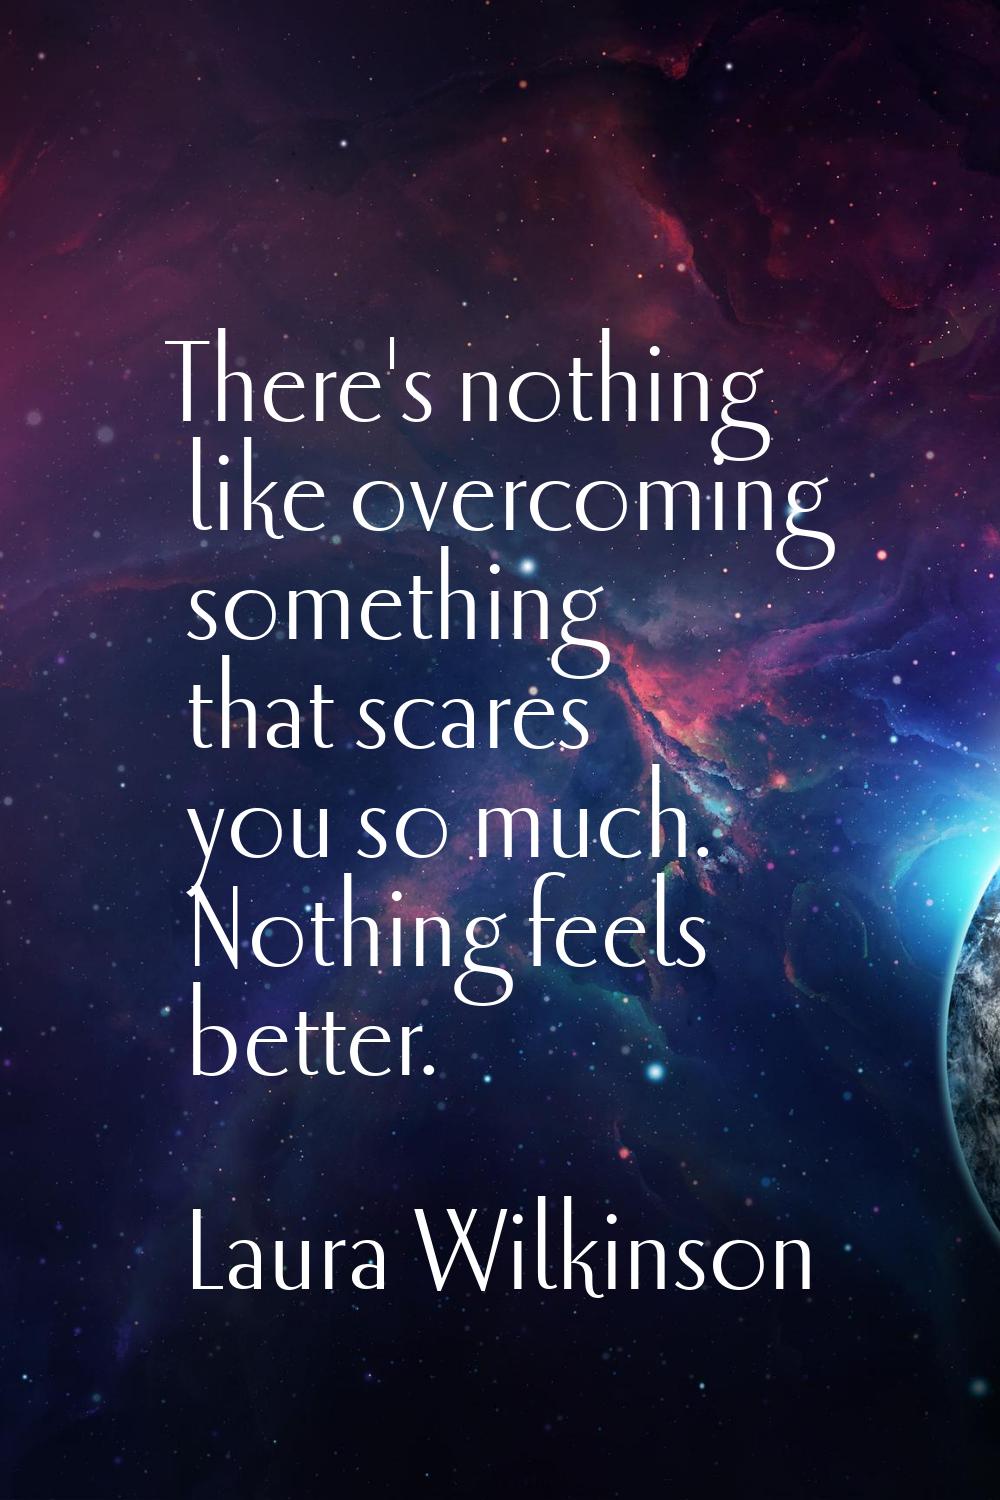 There's nothing like overcoming something that scares you so much. Nothing feels better.